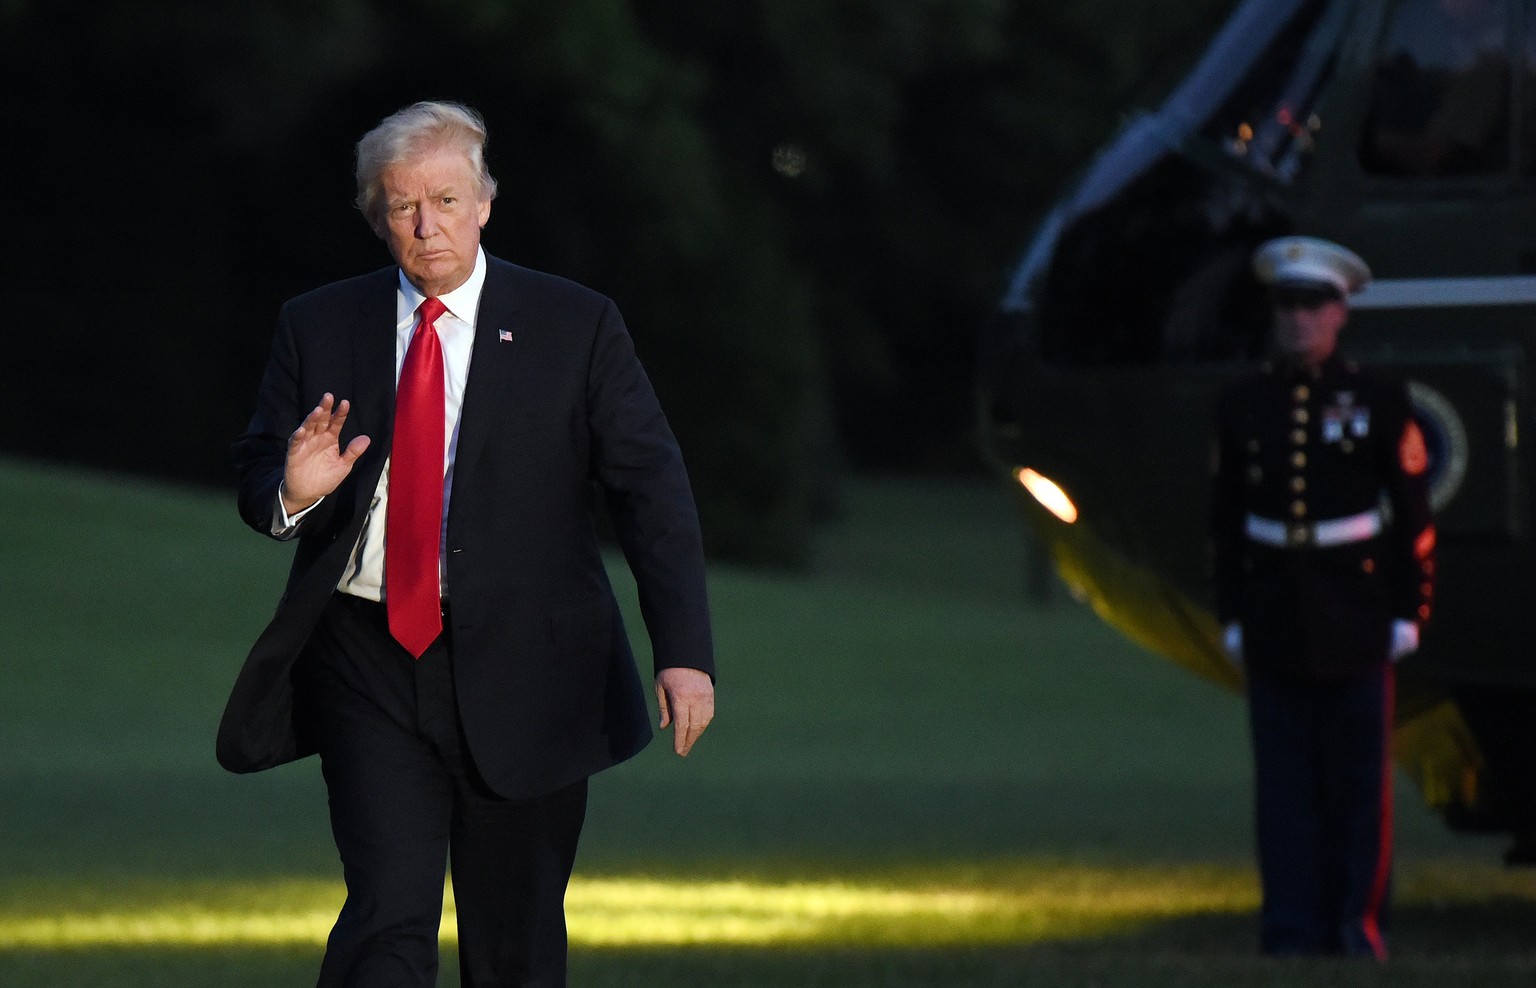 epa06077271 US President Donald J. Trump waves as he returns to the White House in Washington, DC, USA, 08 July 2017, after attending the G20 Summit (G-20 or Group of Twenty) in Hamburg, Germany. EPA/ ...